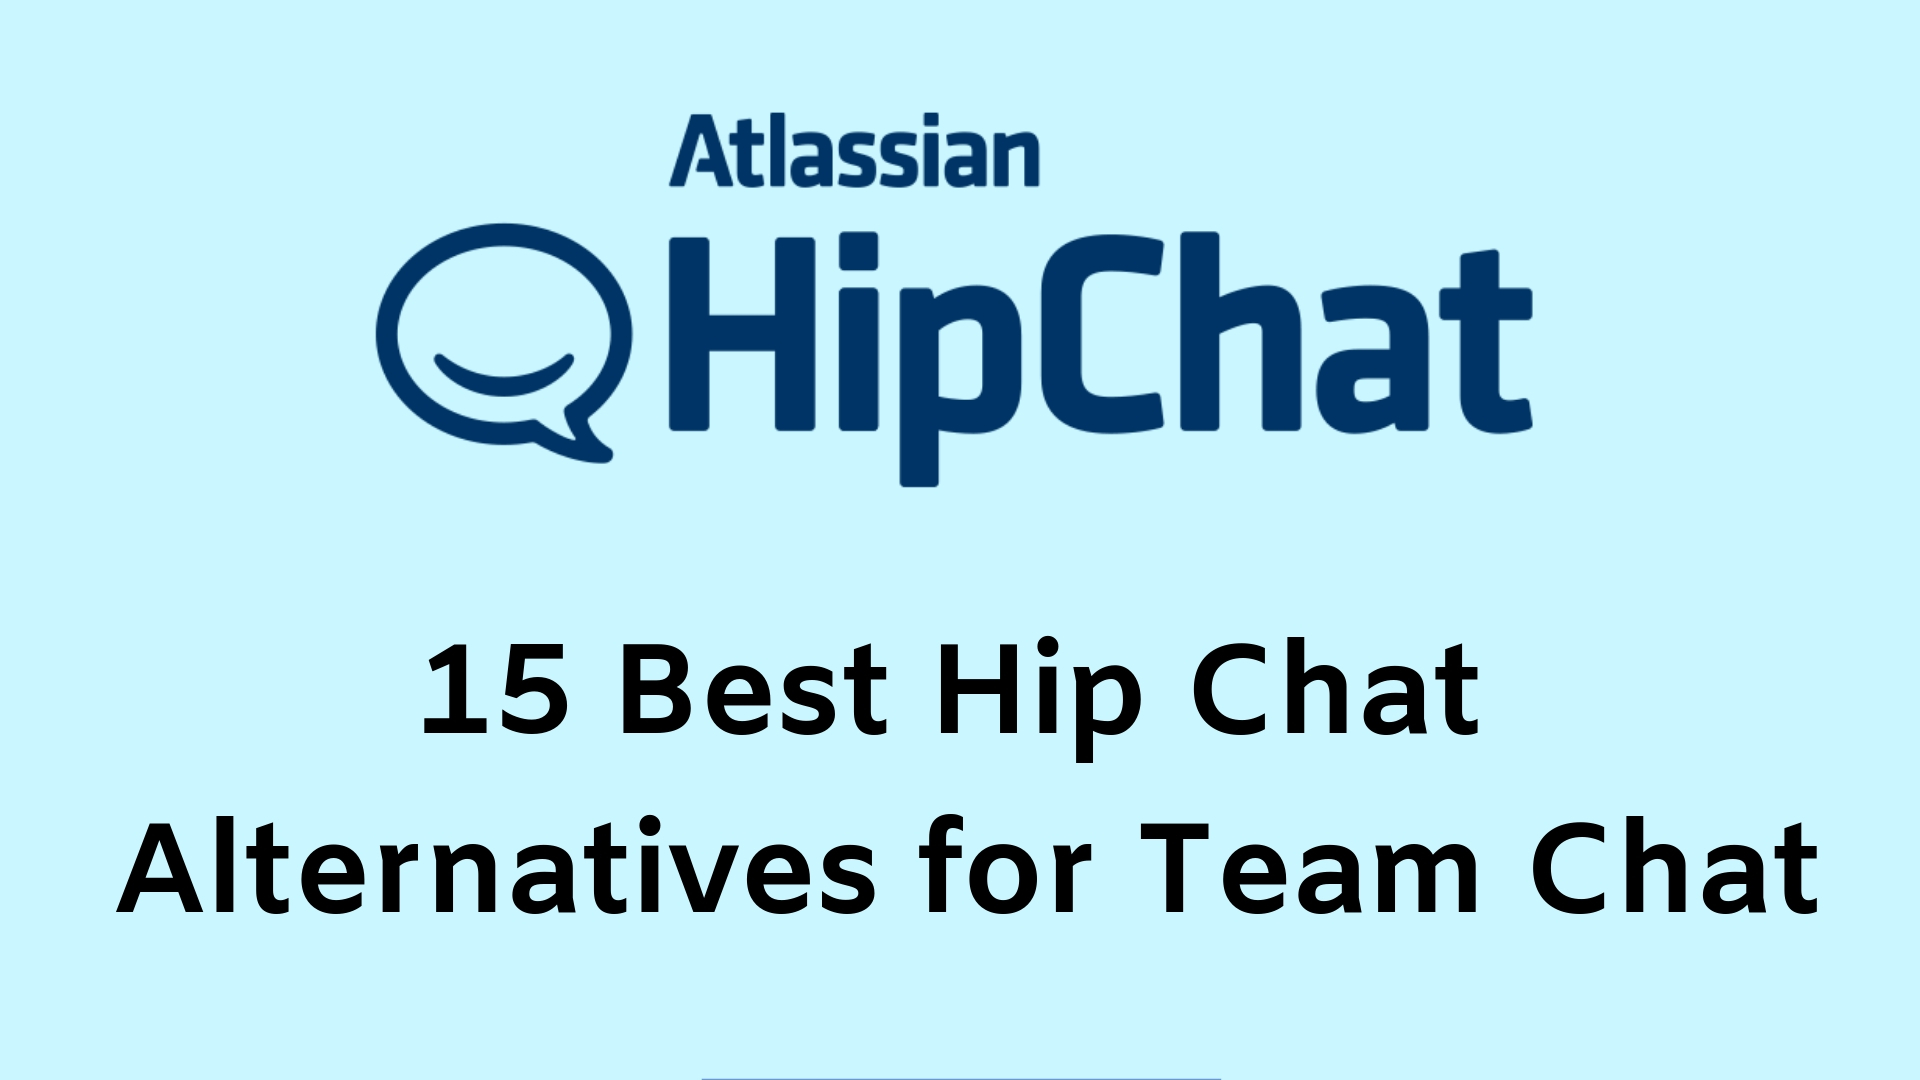 15 Best Hip Chat Alternatives for Team Chat